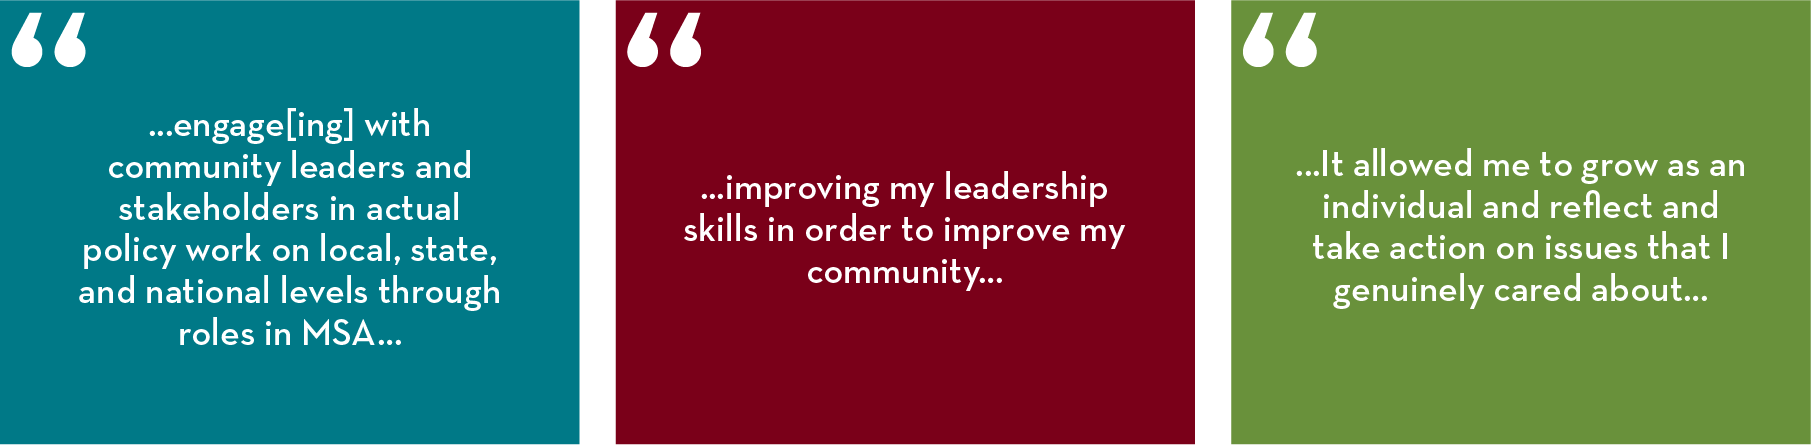 “...engage[ing] with community leaders and stakeholders in actual policy work on local, state, and national levels through roles in MSA…”  “...improving my leadership skills in order to improve my community…” “...It allowed me to grow as an individual and